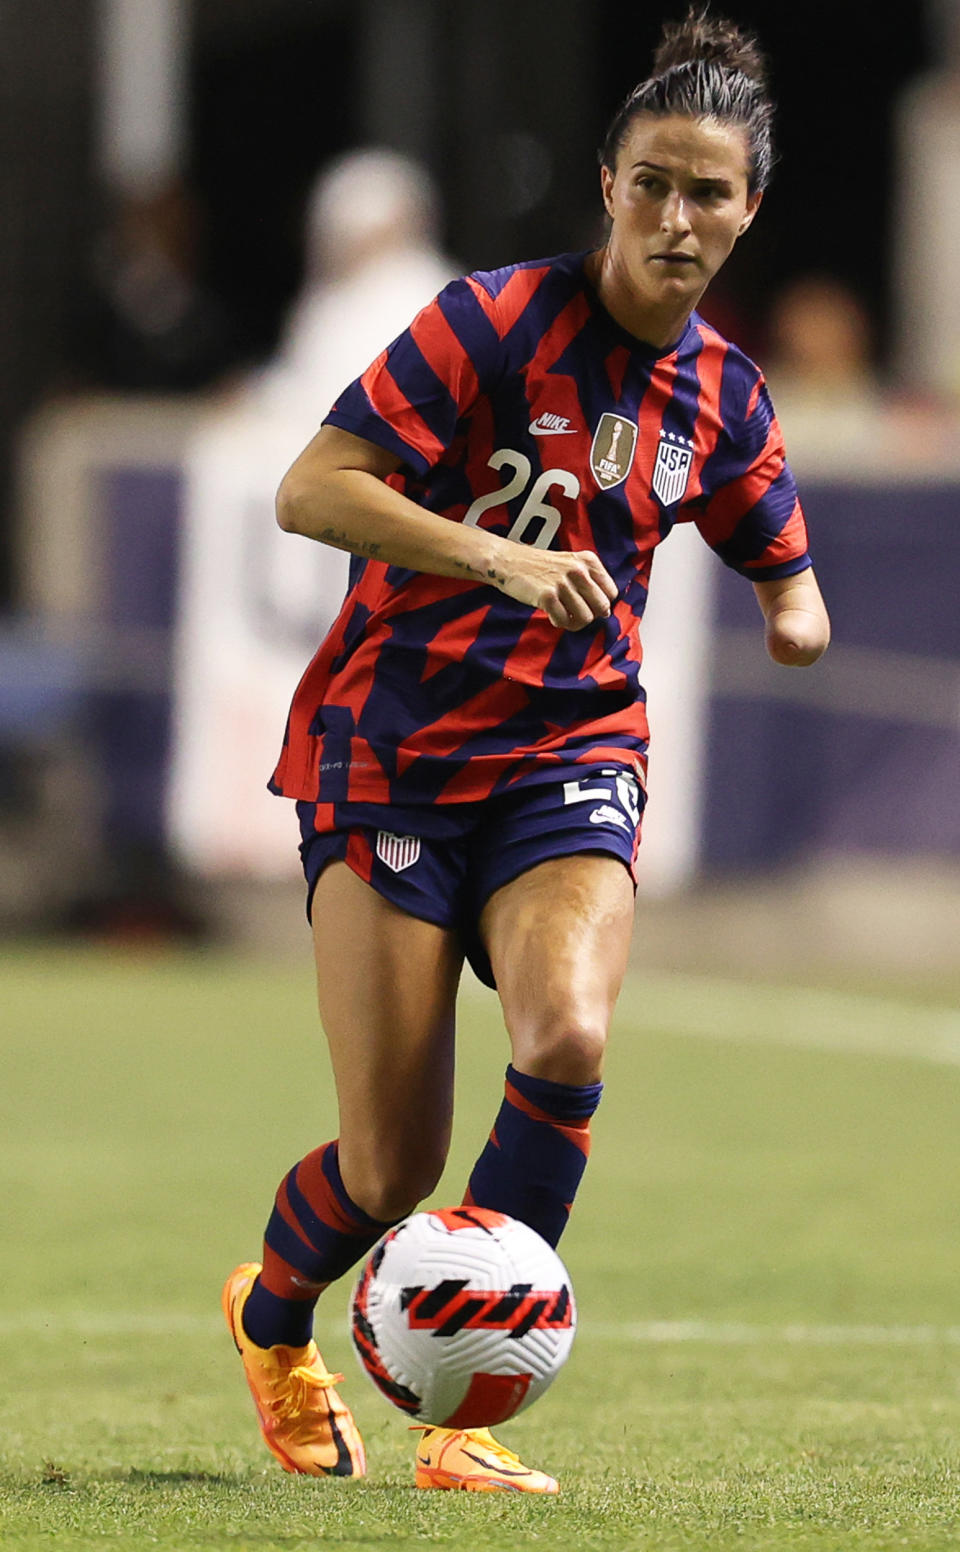 Carson Pickett controls the ball during the United States' match against Colombia. (Omar Vega / Getty Images)